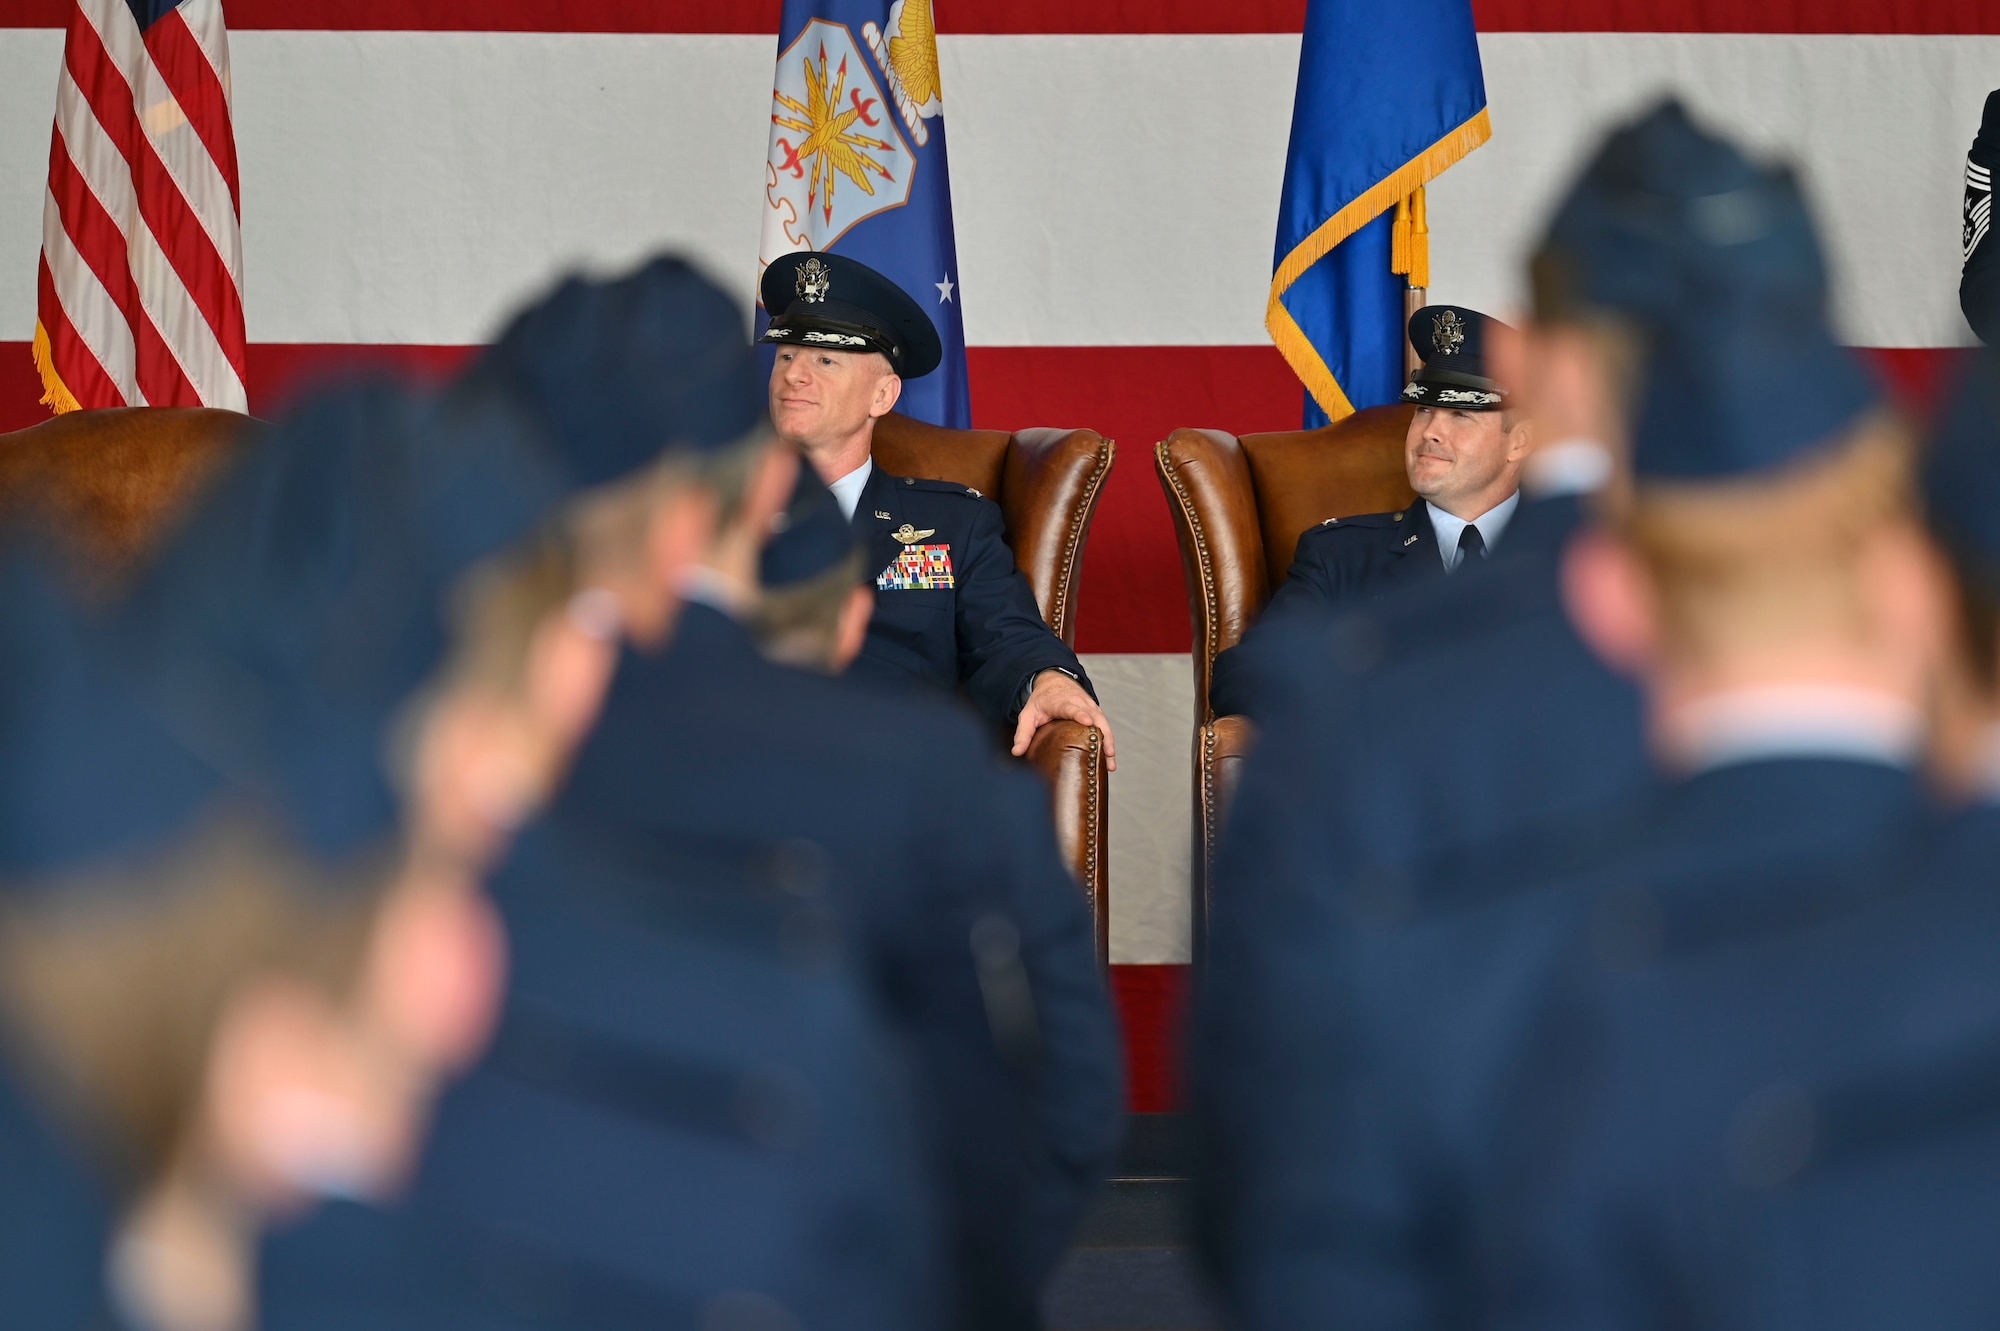 U.S. Air Force Col. Seth Graham, outgoing 14th Flying Training Wing commander and Col. Justin Grieves, incoming 14th FTW commander, listen as Maj. Gen. Craig Wills, 19th Air Force commander, speaks to the crowd at the Change of Command ceremony on Columbus Air Force Base, Miss., July 22, 2022. The Colonels share similar backgrounds, as they were both previous bomber pilots in their careers. (U.S. Air Force photo by Senior Airman Jessica Haynie)